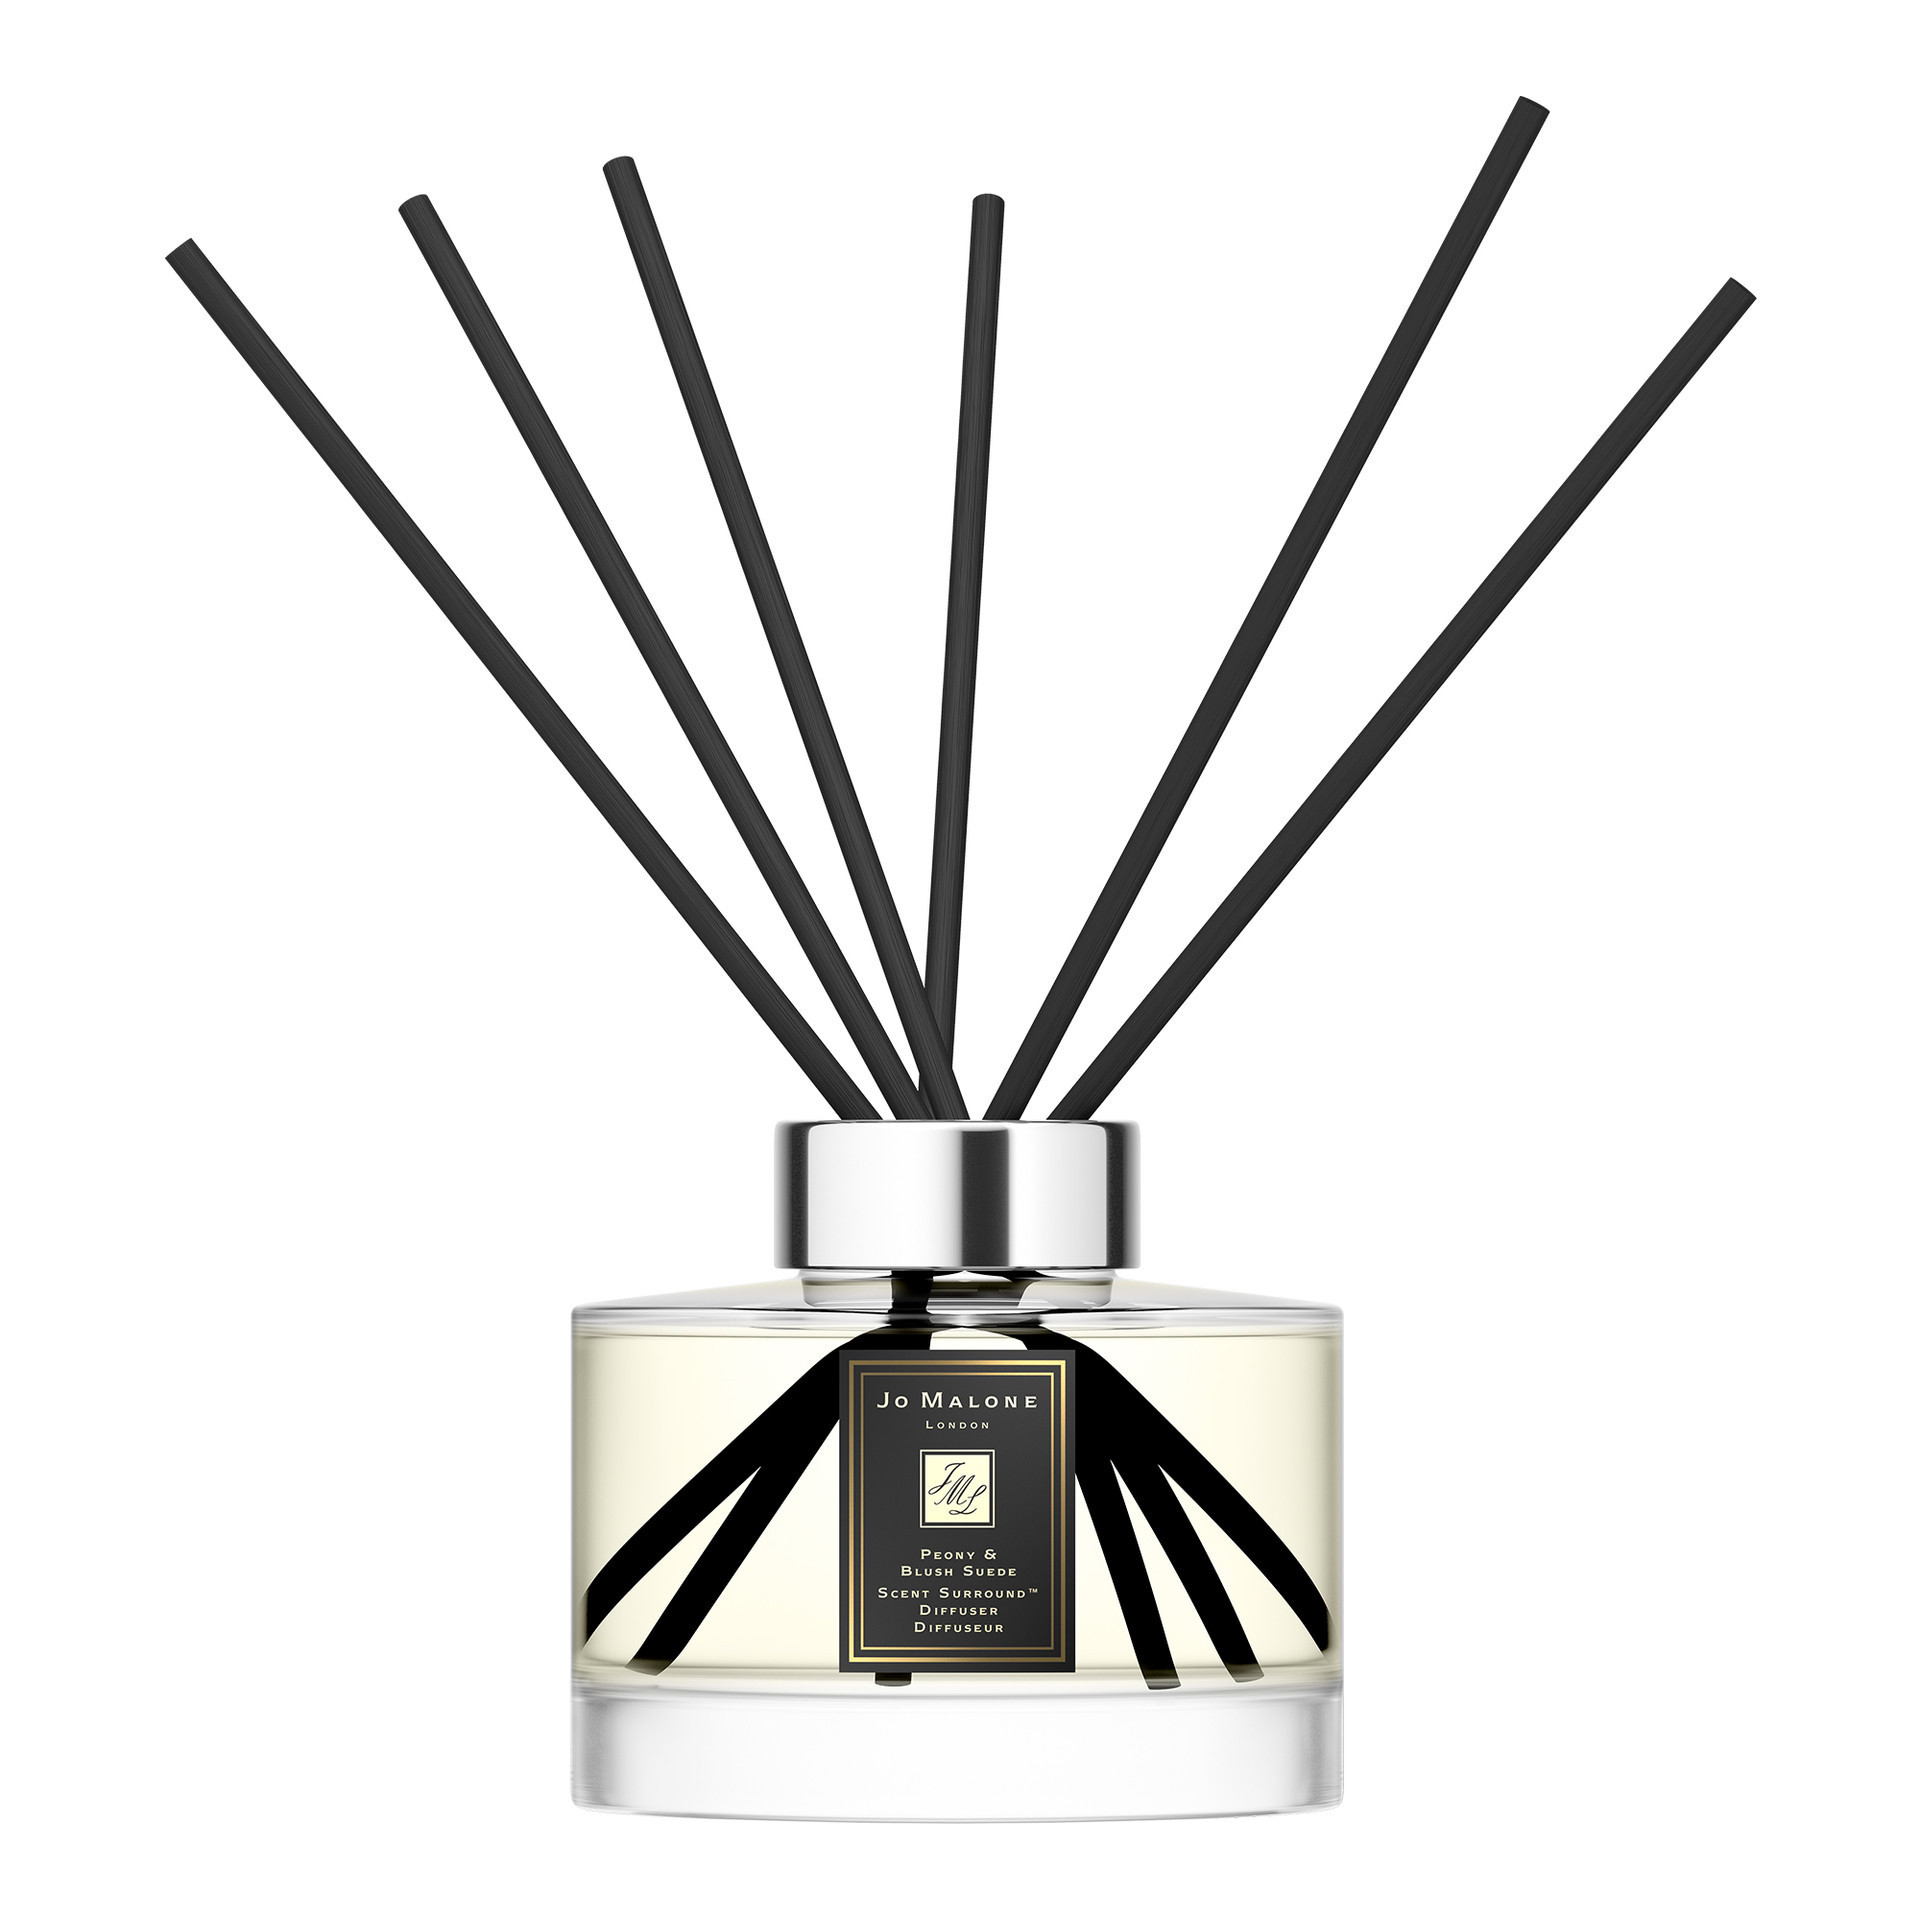 Jo Malone London peony & blush suede diffuser 165 ml, Beige, large image number 0